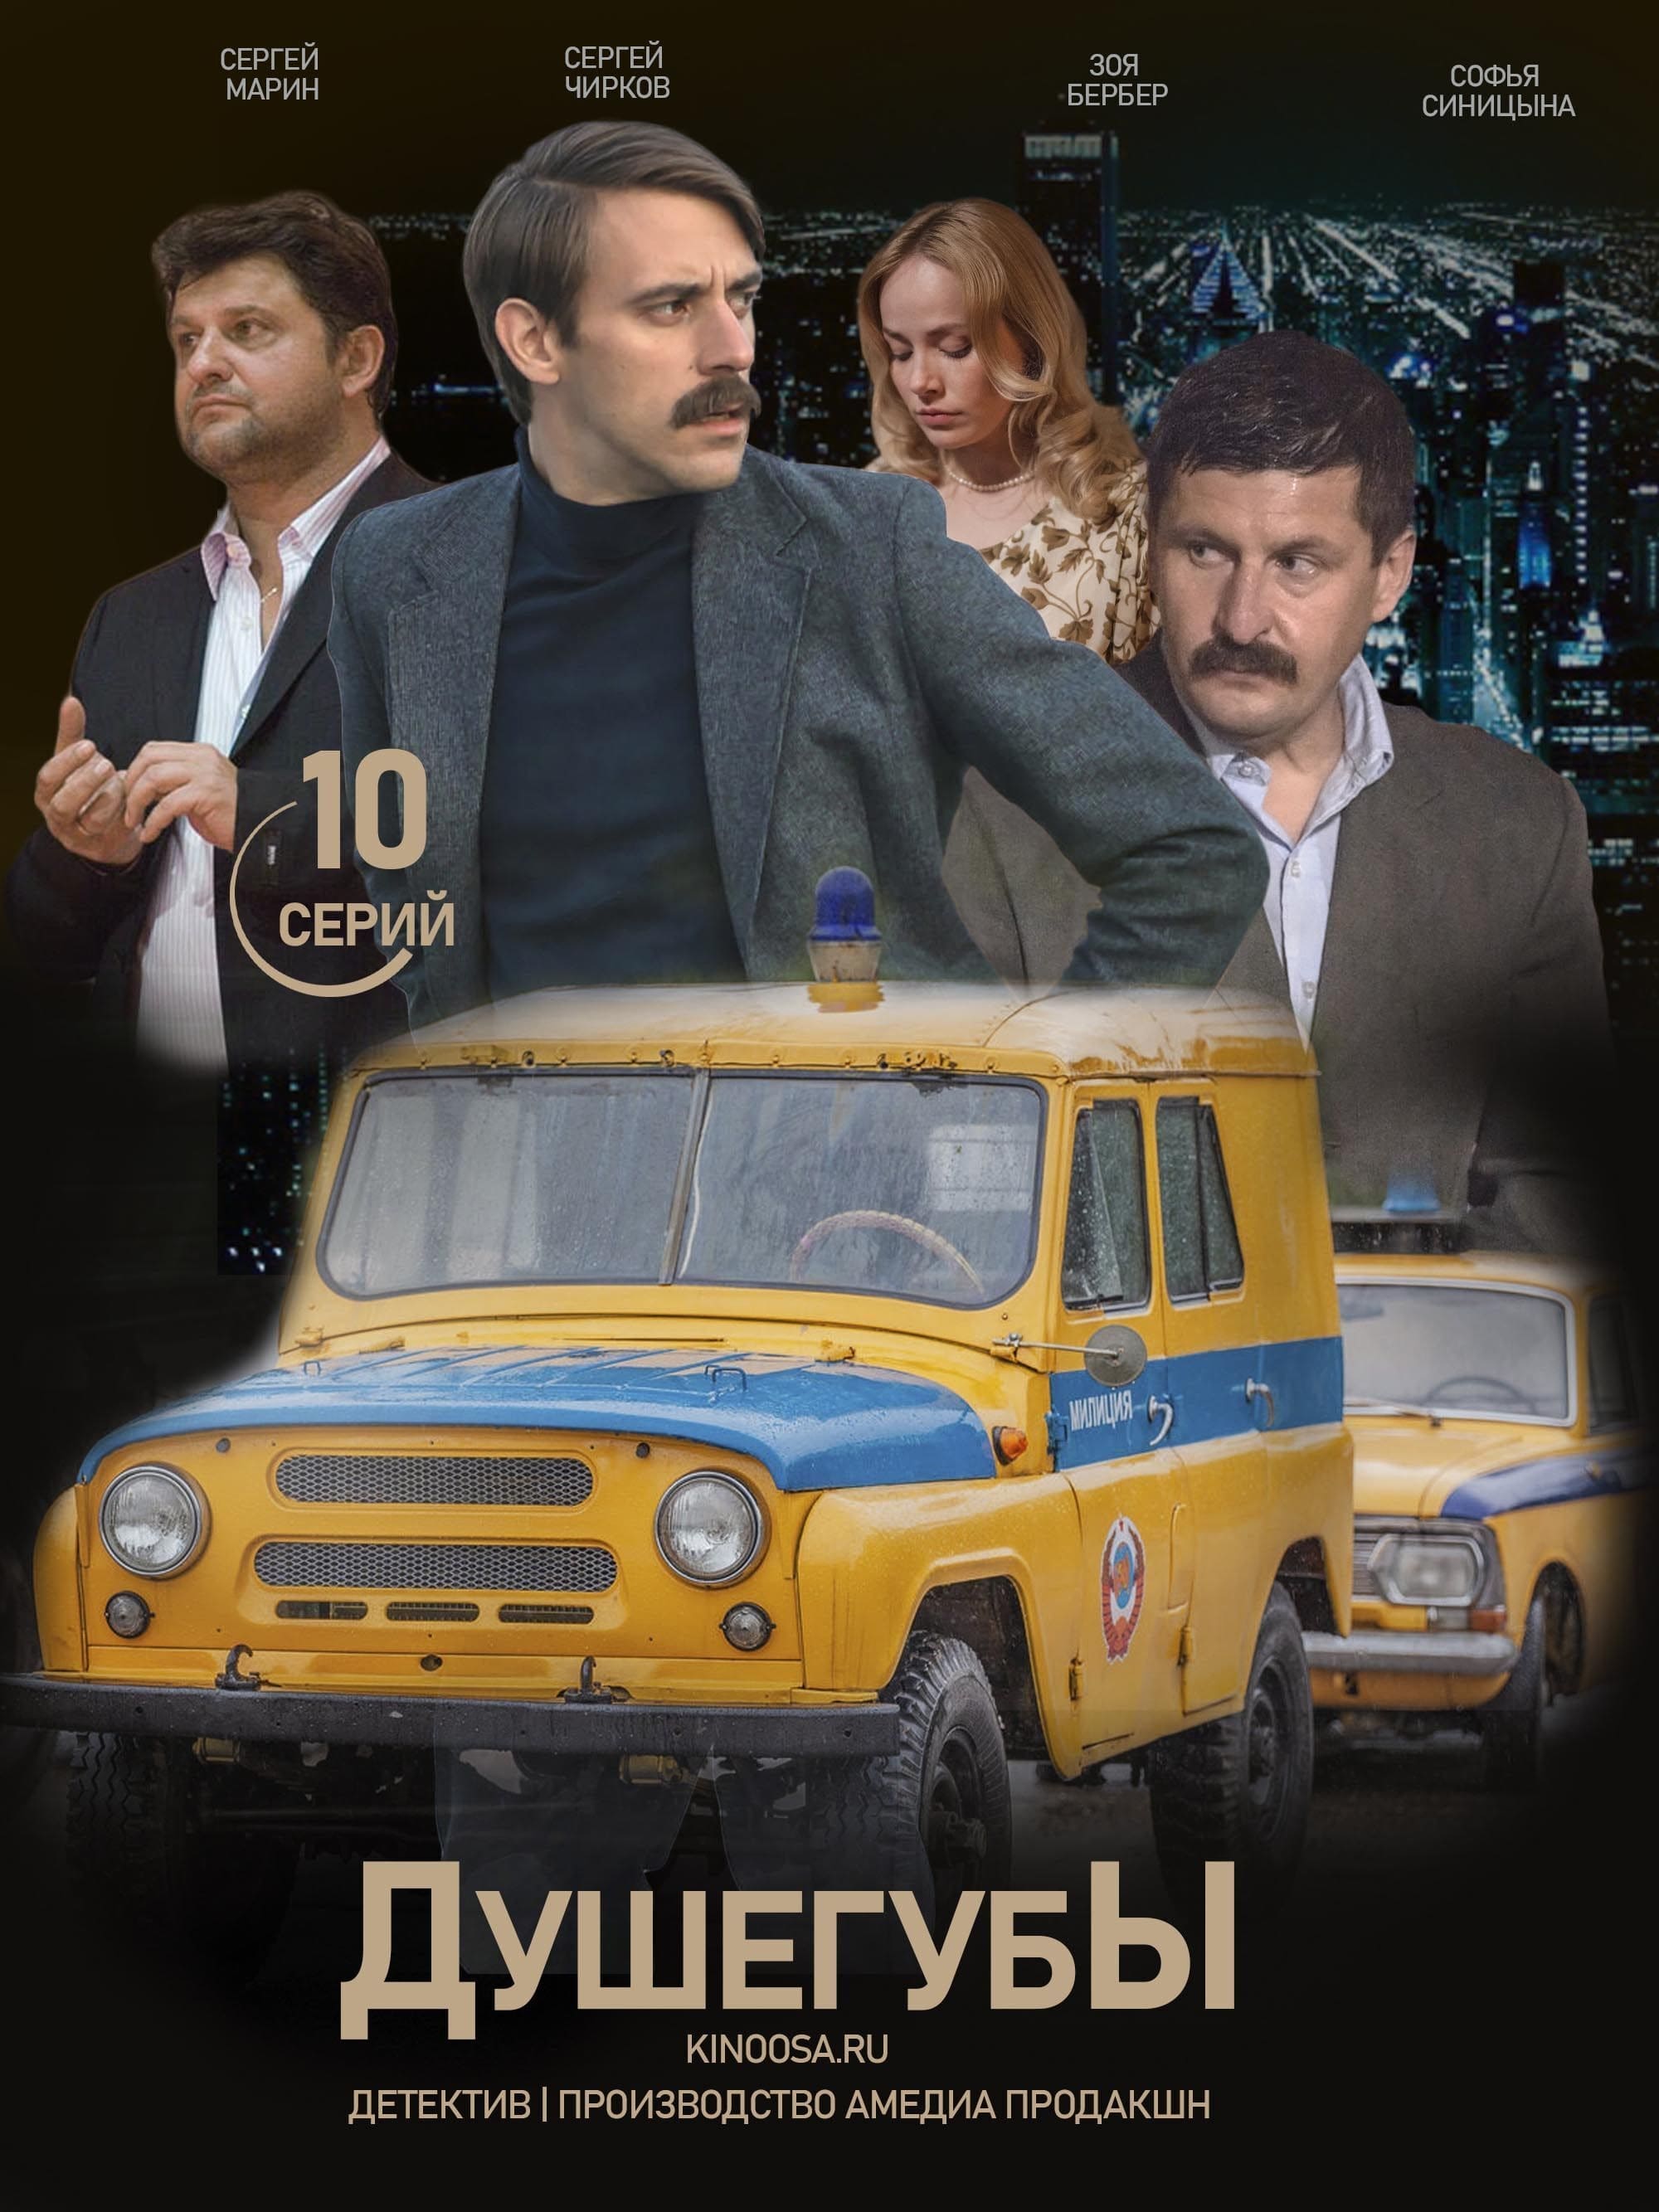 Душегубы TV Shows About Police Detective